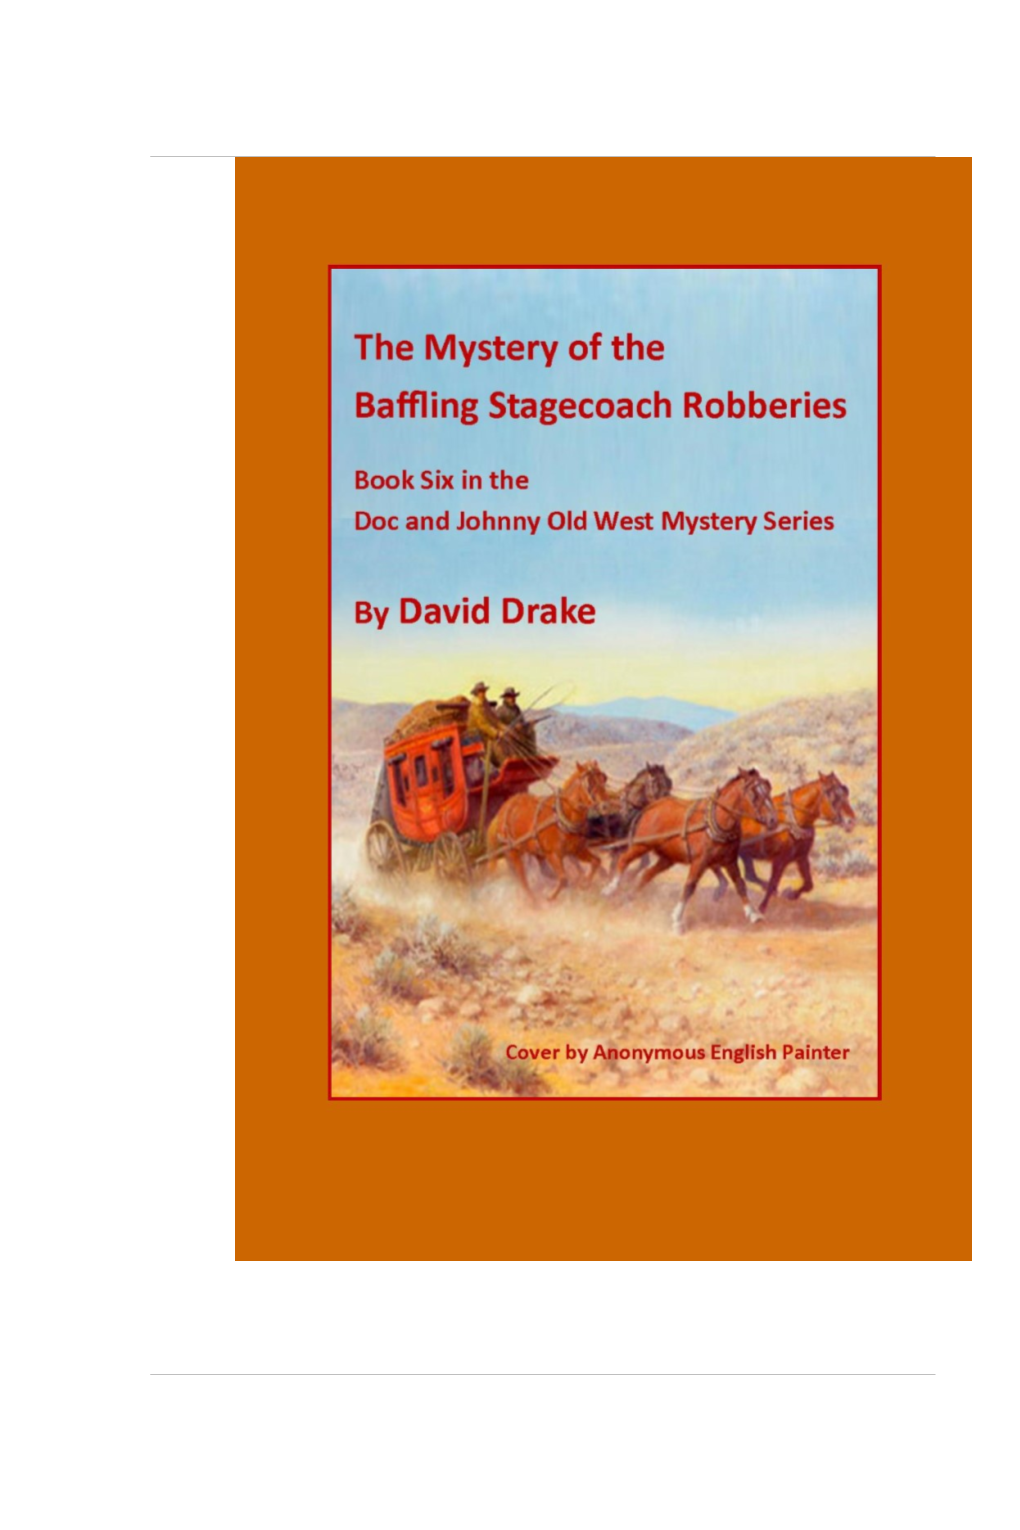 BOOK SIX, in the Doc and Johnny Old West Mystery Series